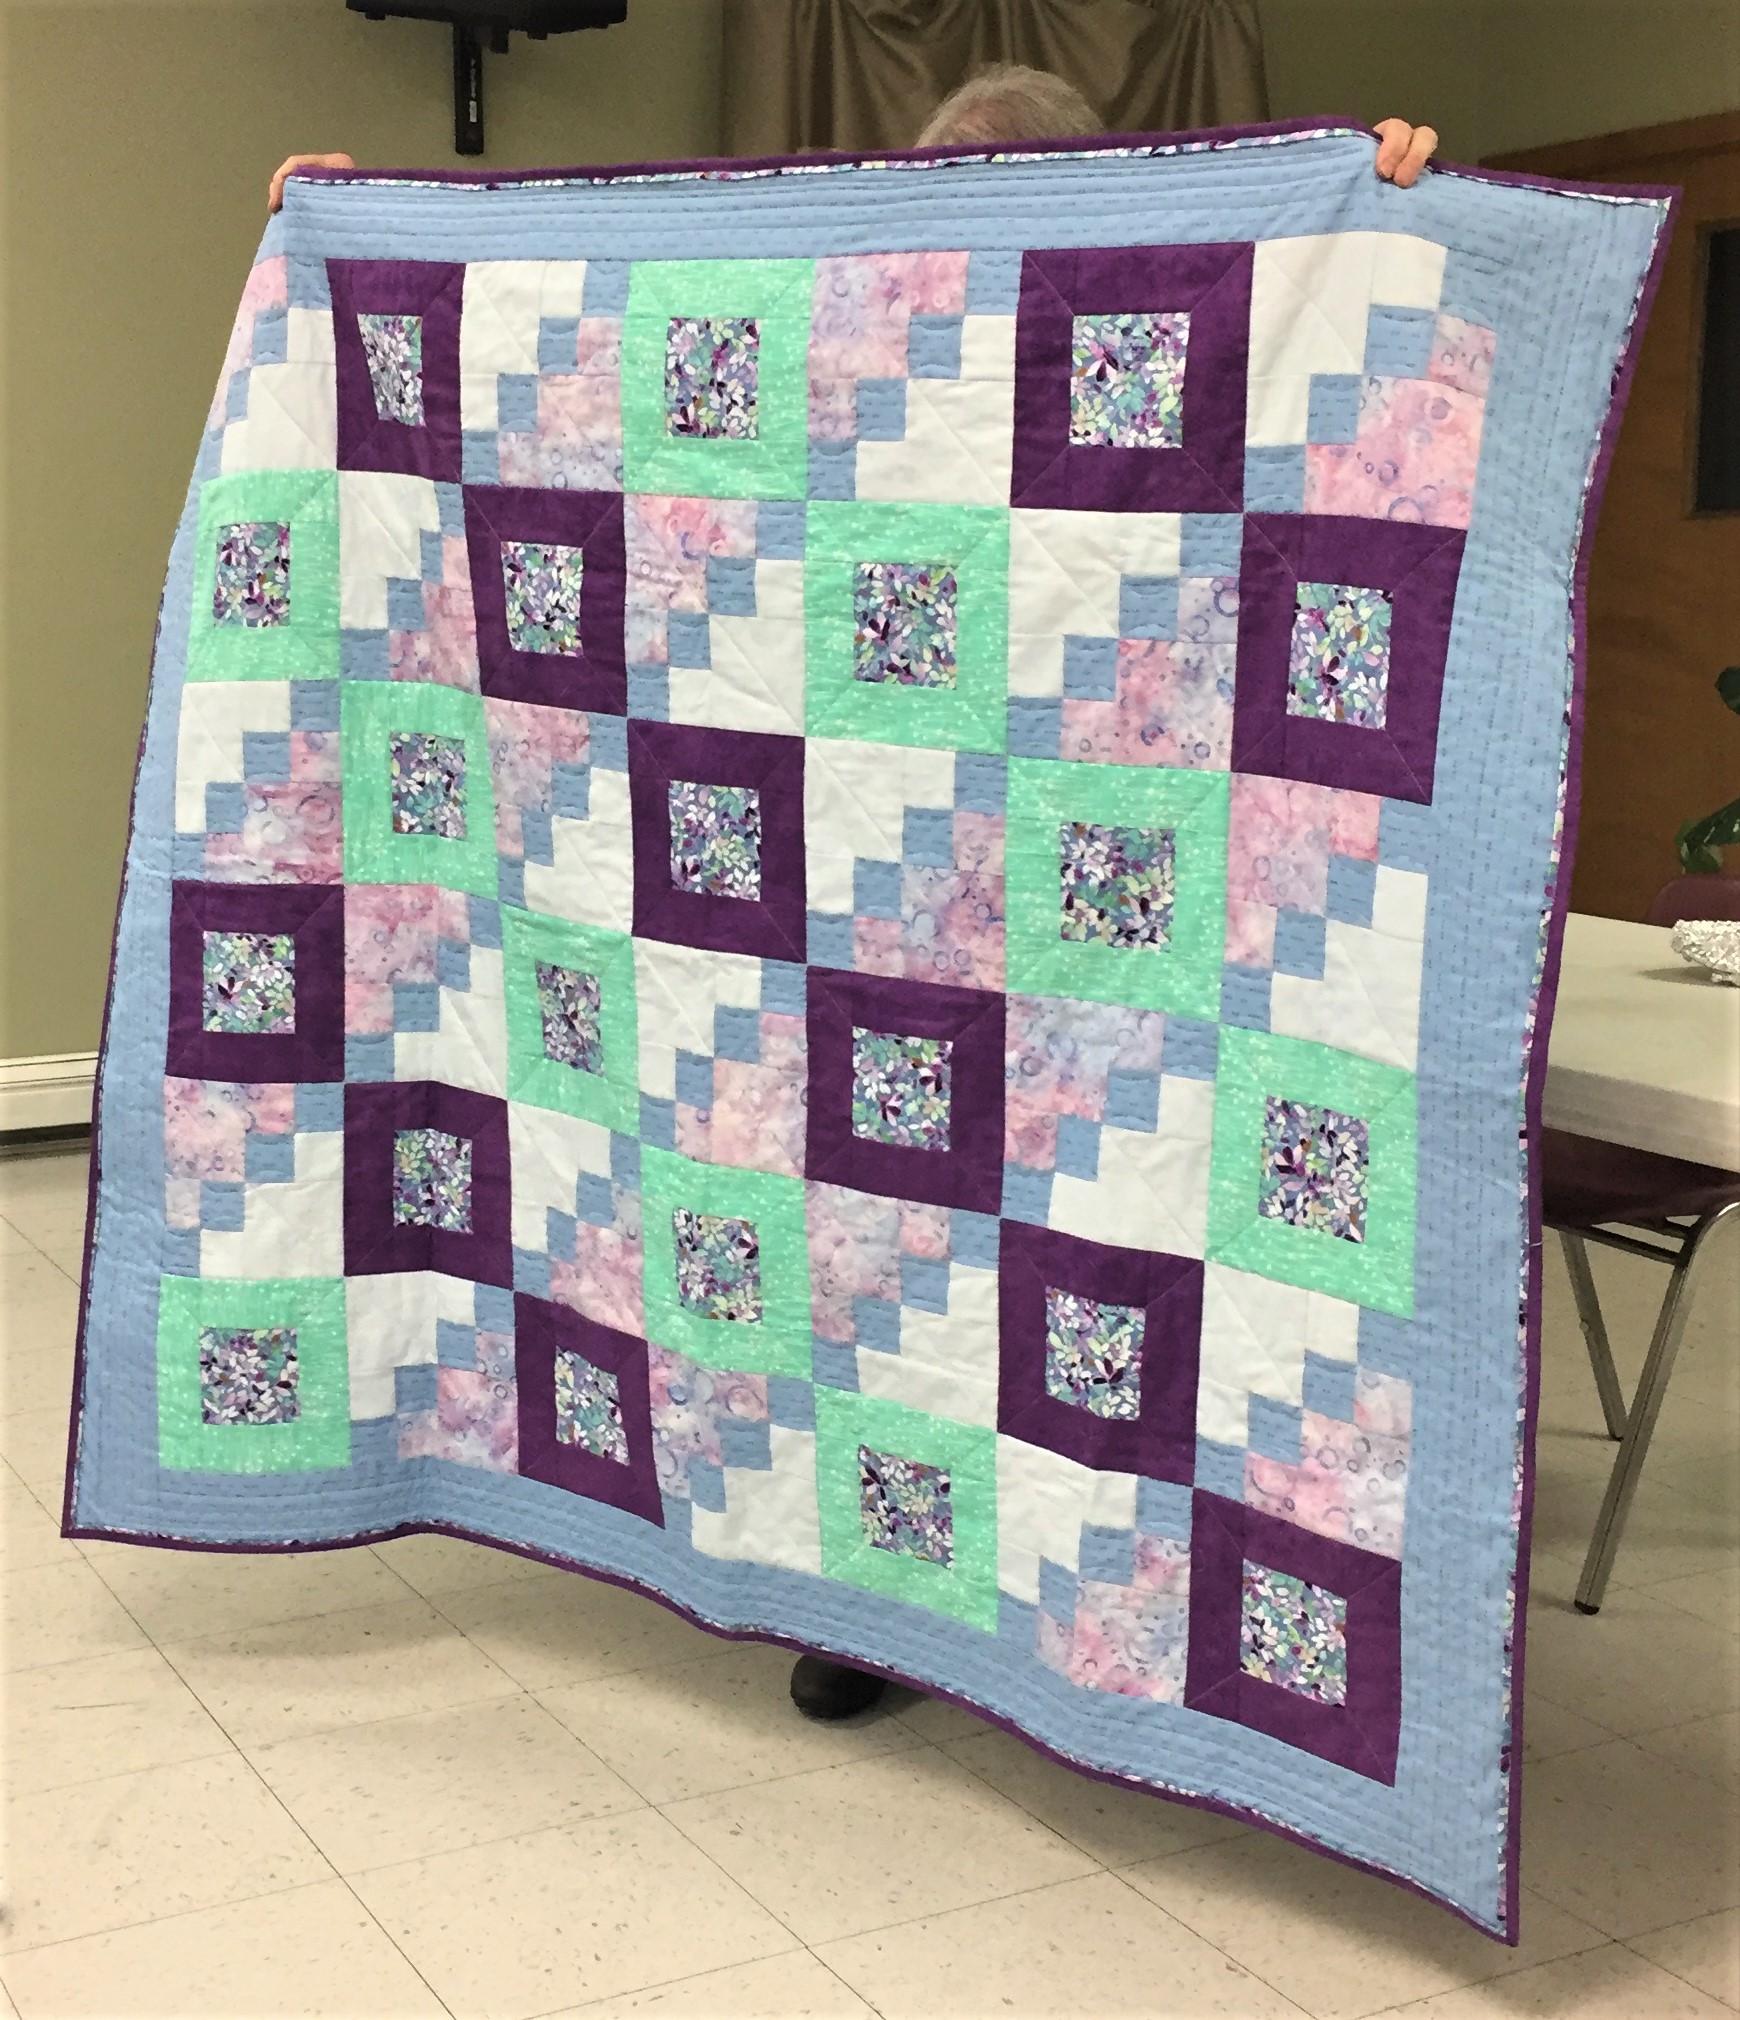 Cindy's Mystery Quilt